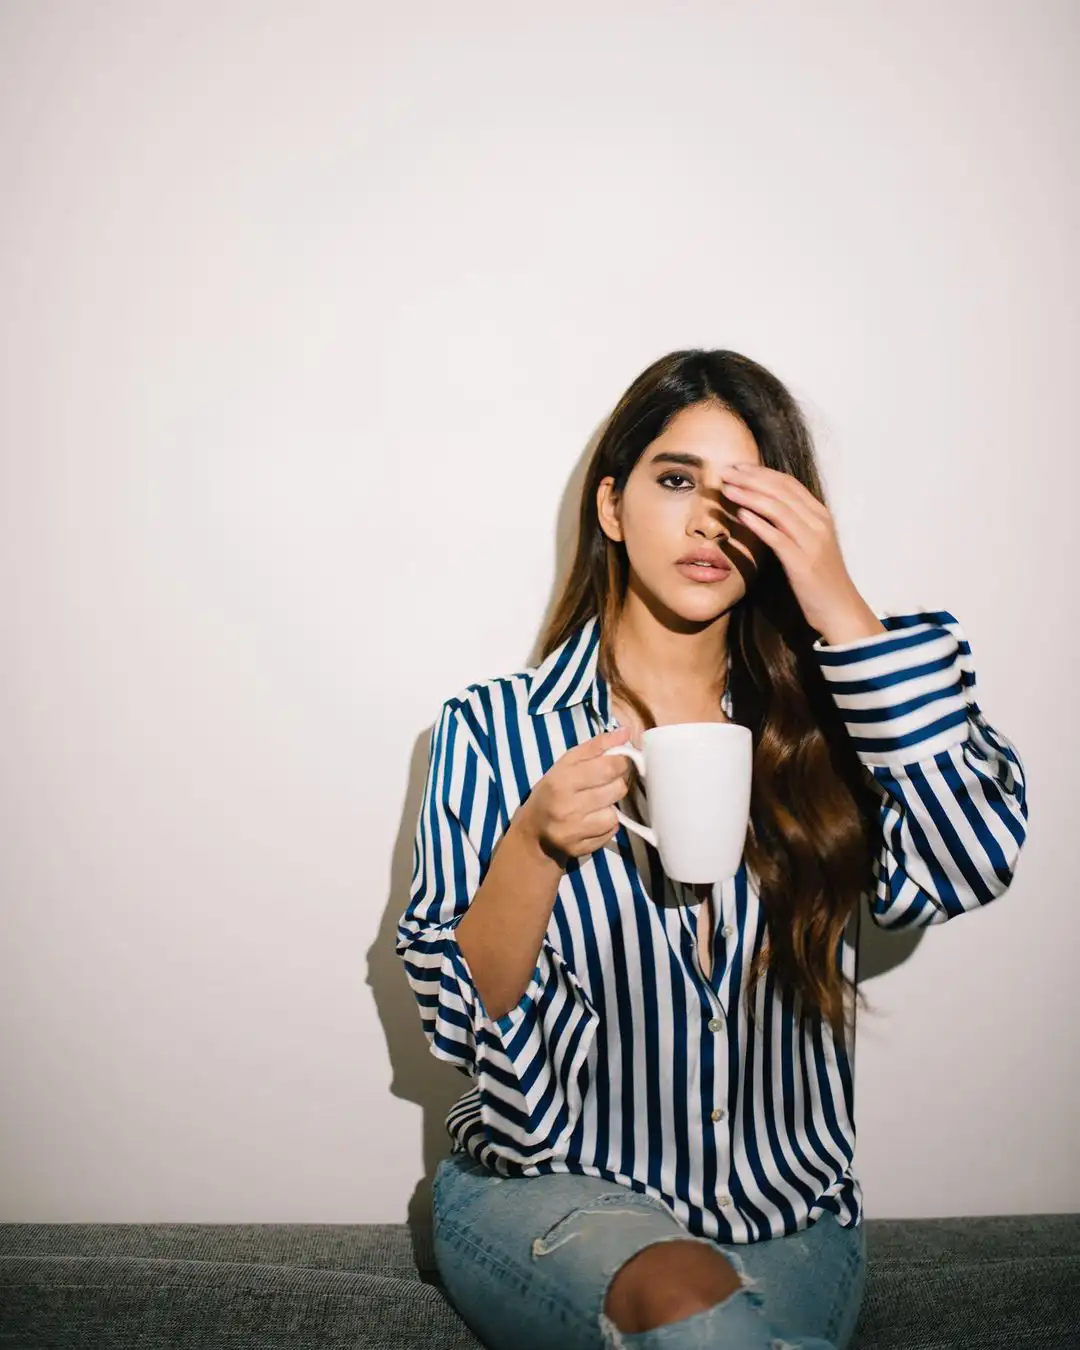 Nabha Natesh Stylish looks with coffee cup in Modern outfit  